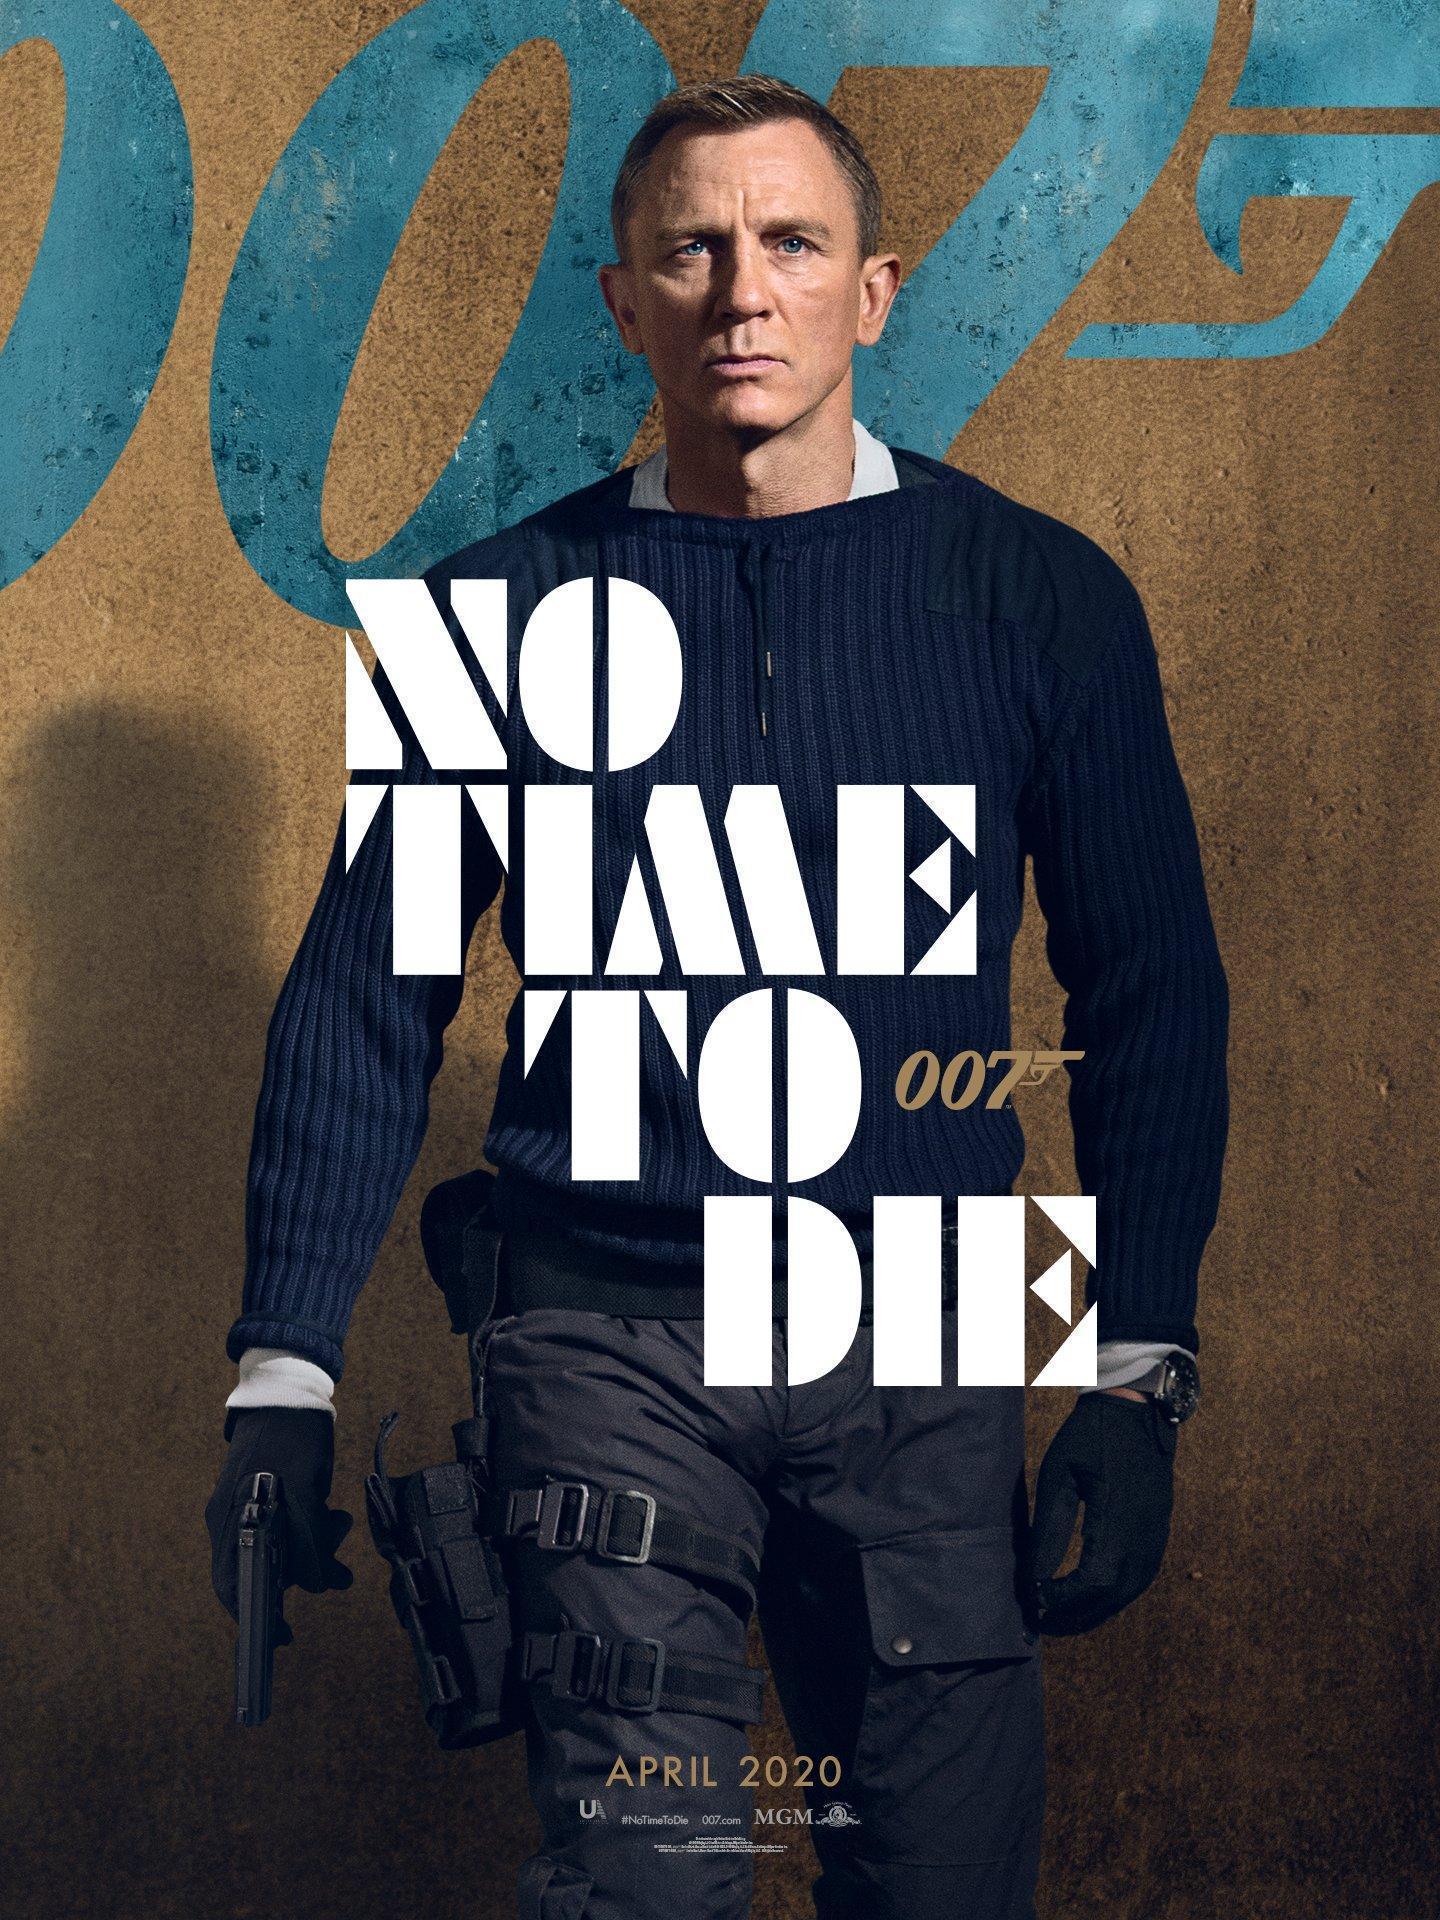 China premiere of James Bond's 'No Time to Die' cancelled amid coronavirus outbreak